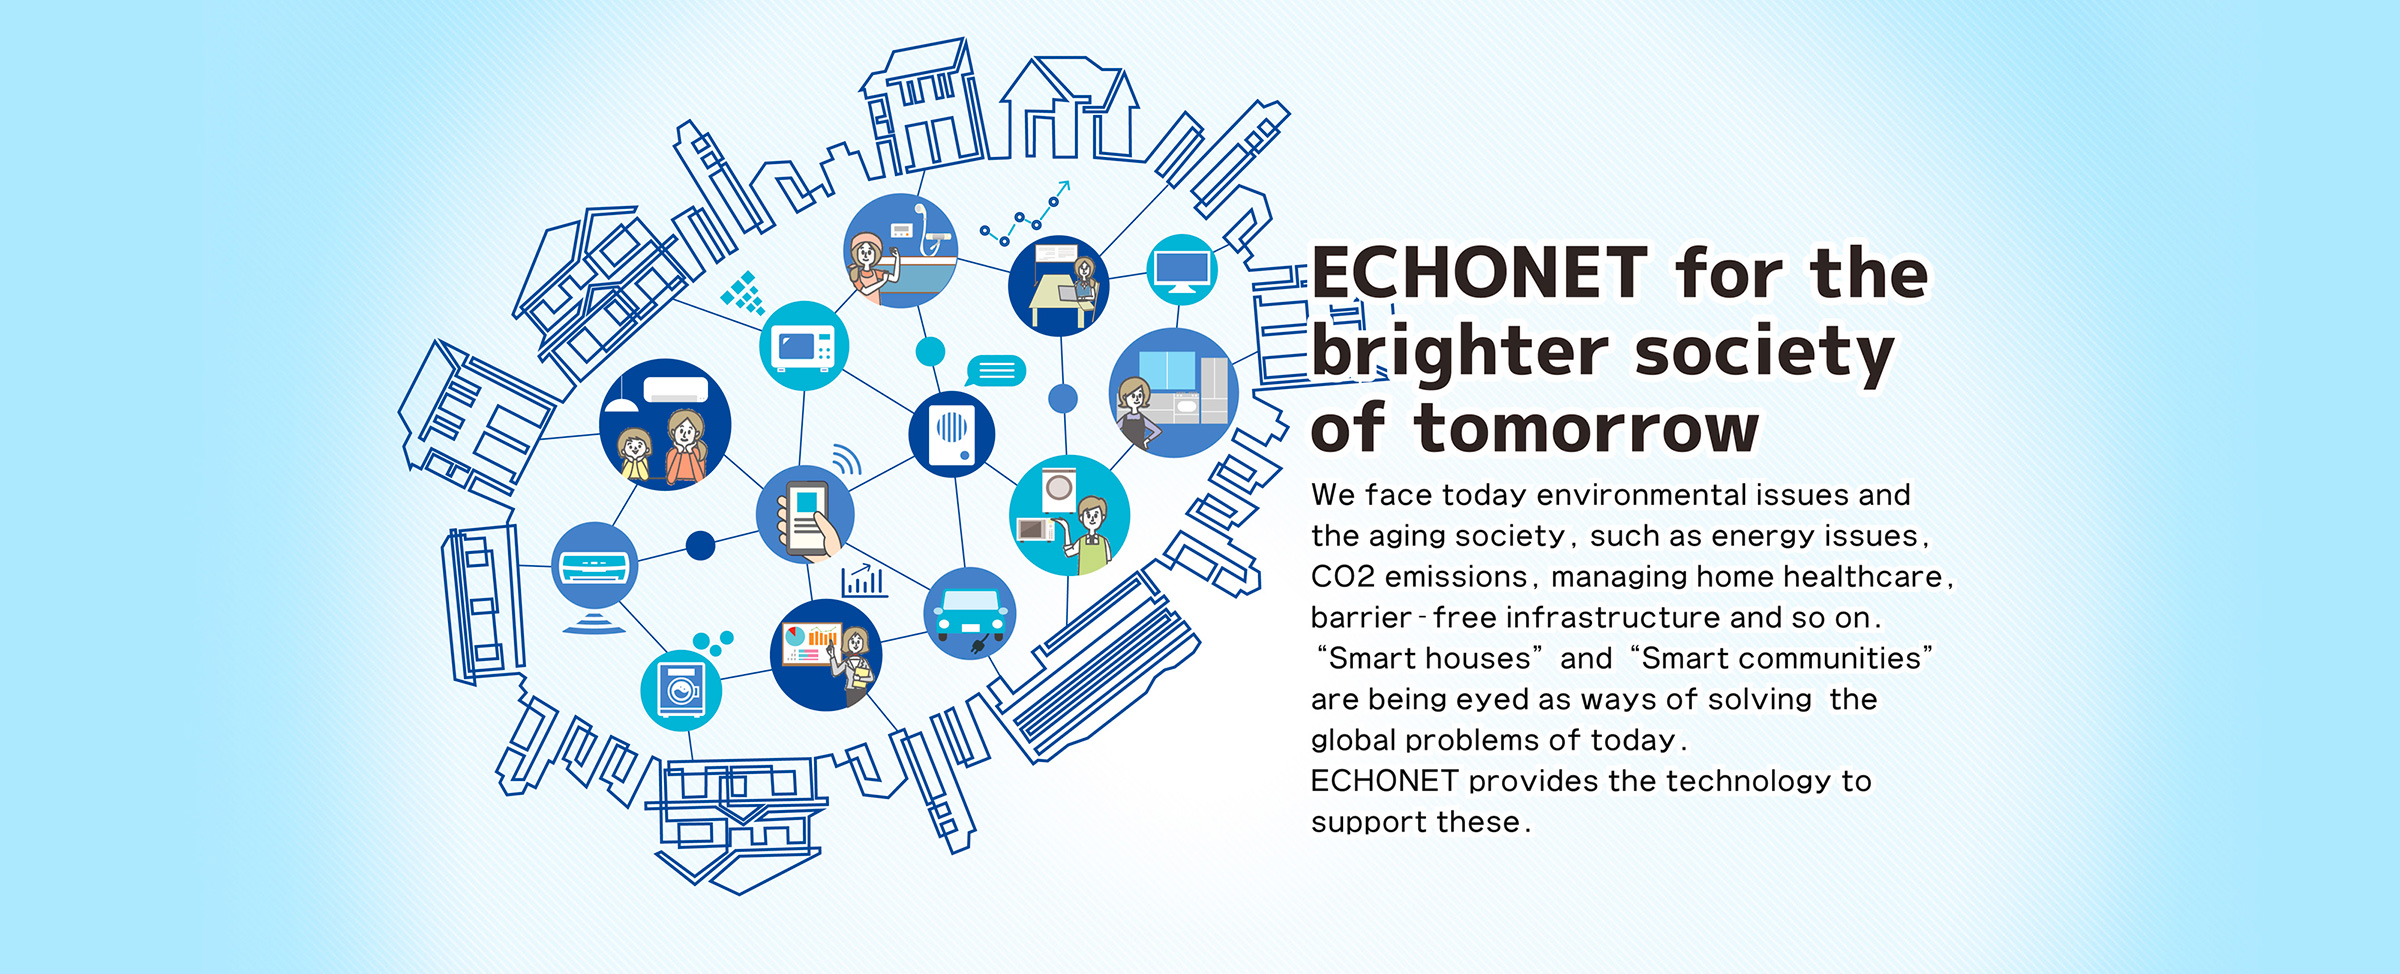 ECHONET for the brighter society of tomorrow